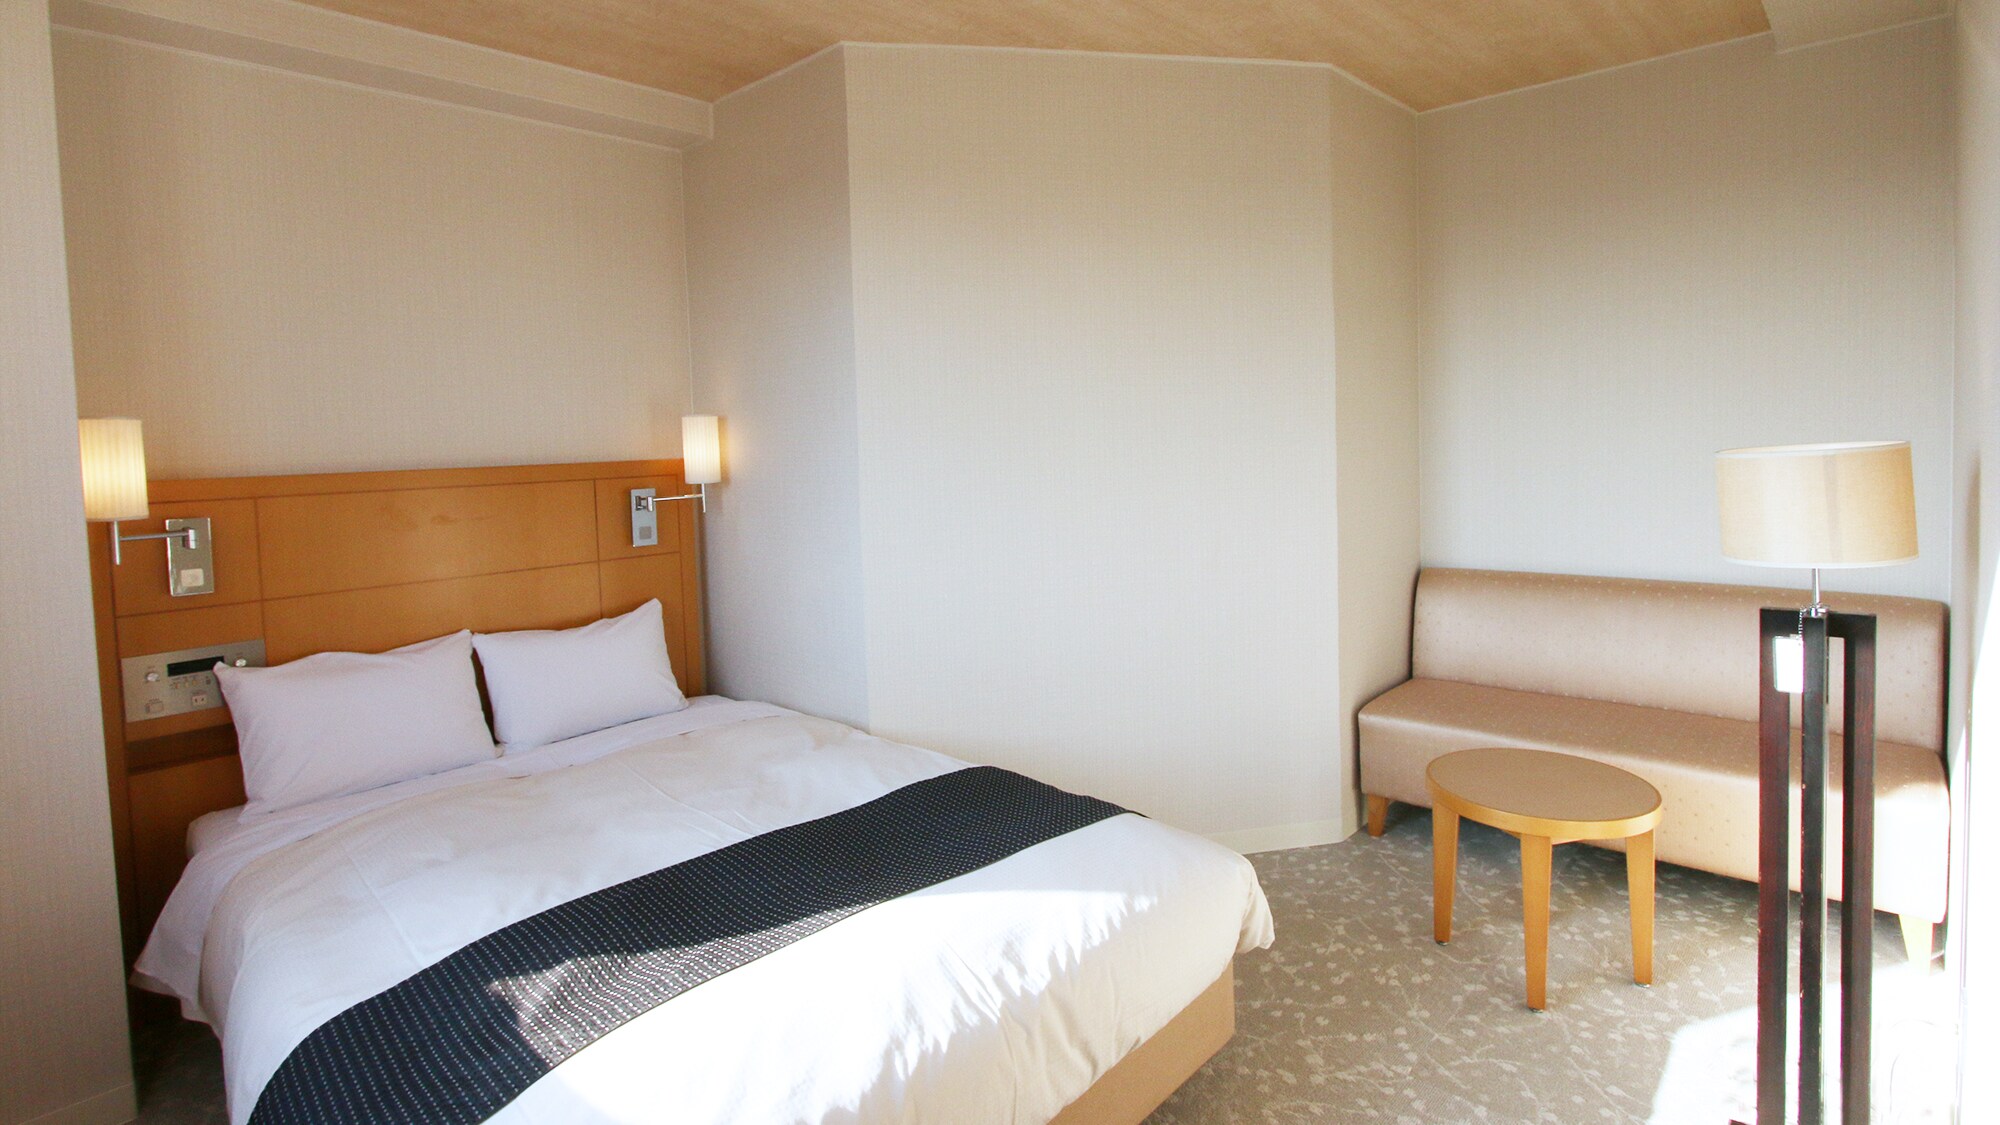 Double room (electronic cigarettes allowed)